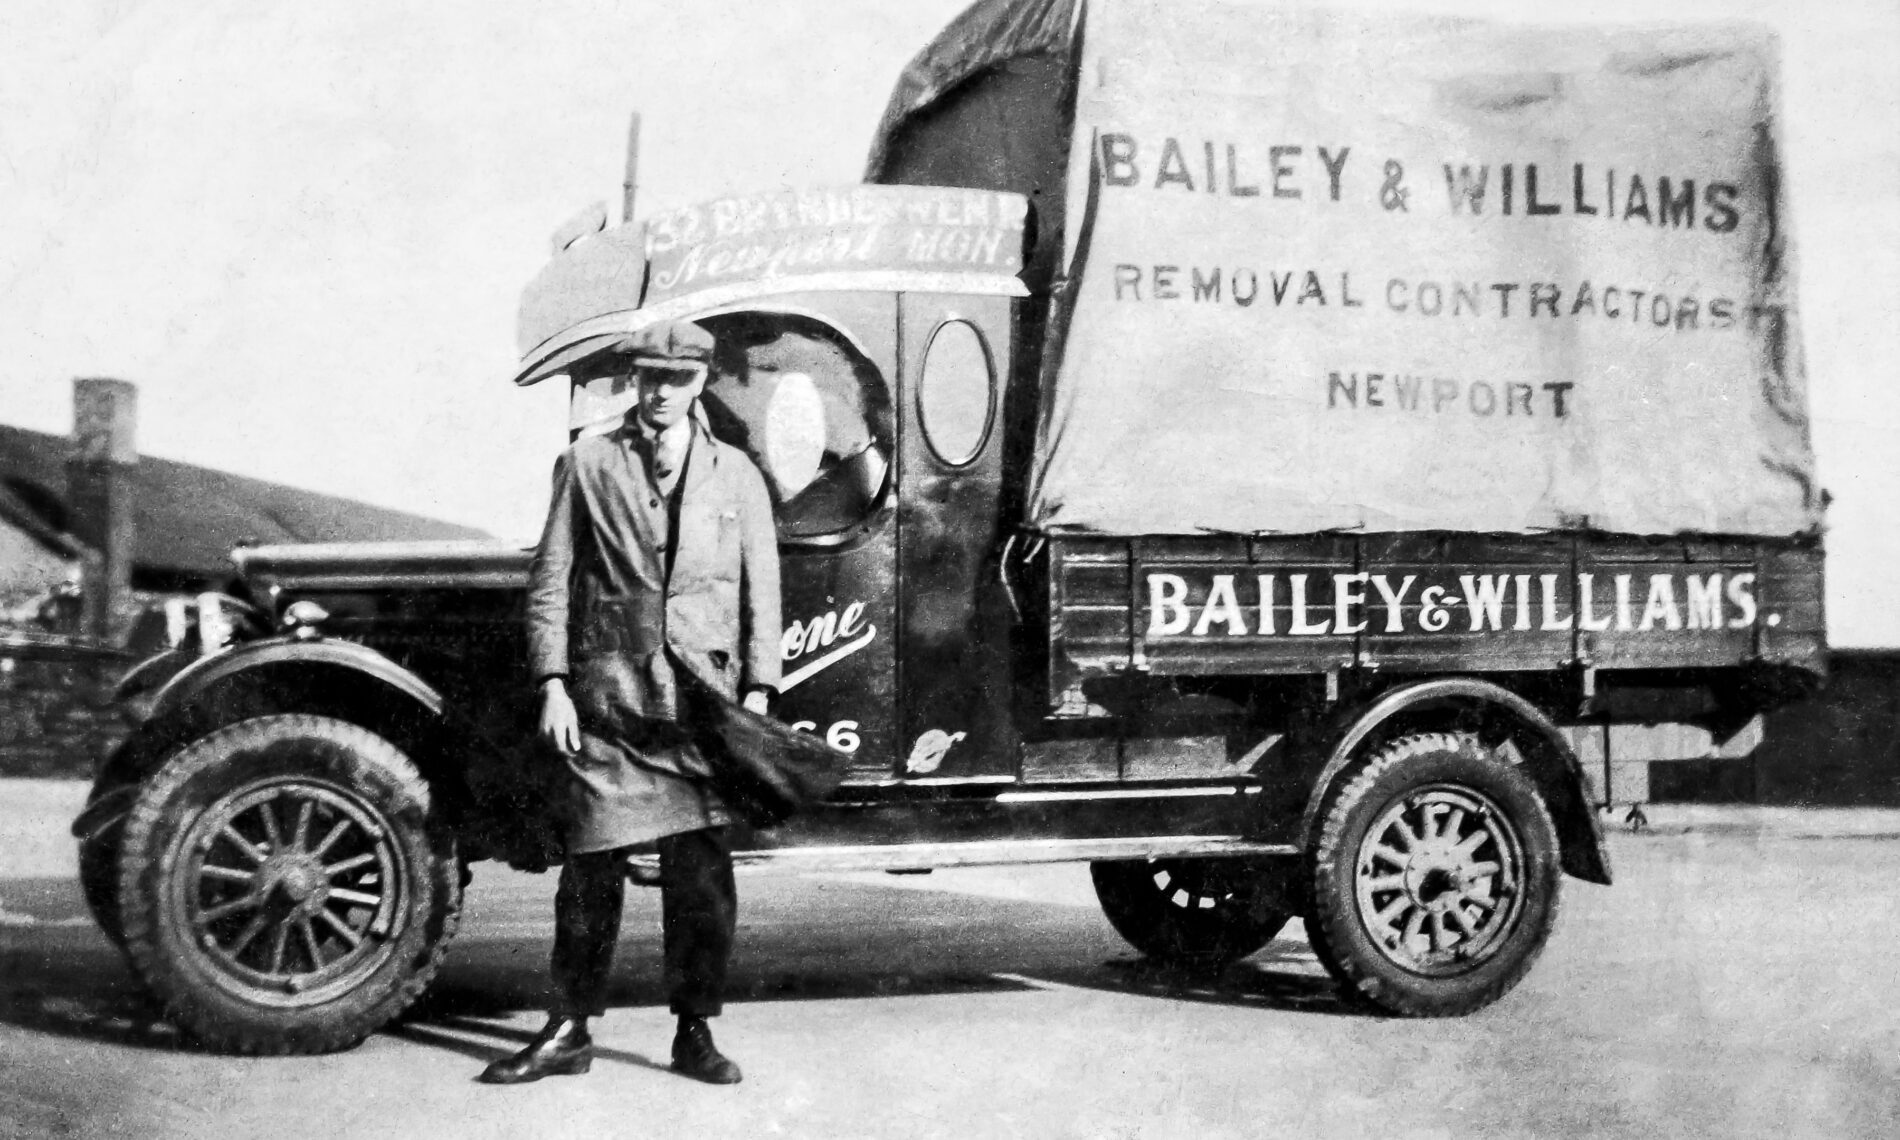 cecil bailey in front of a historic bailey and williams removals van